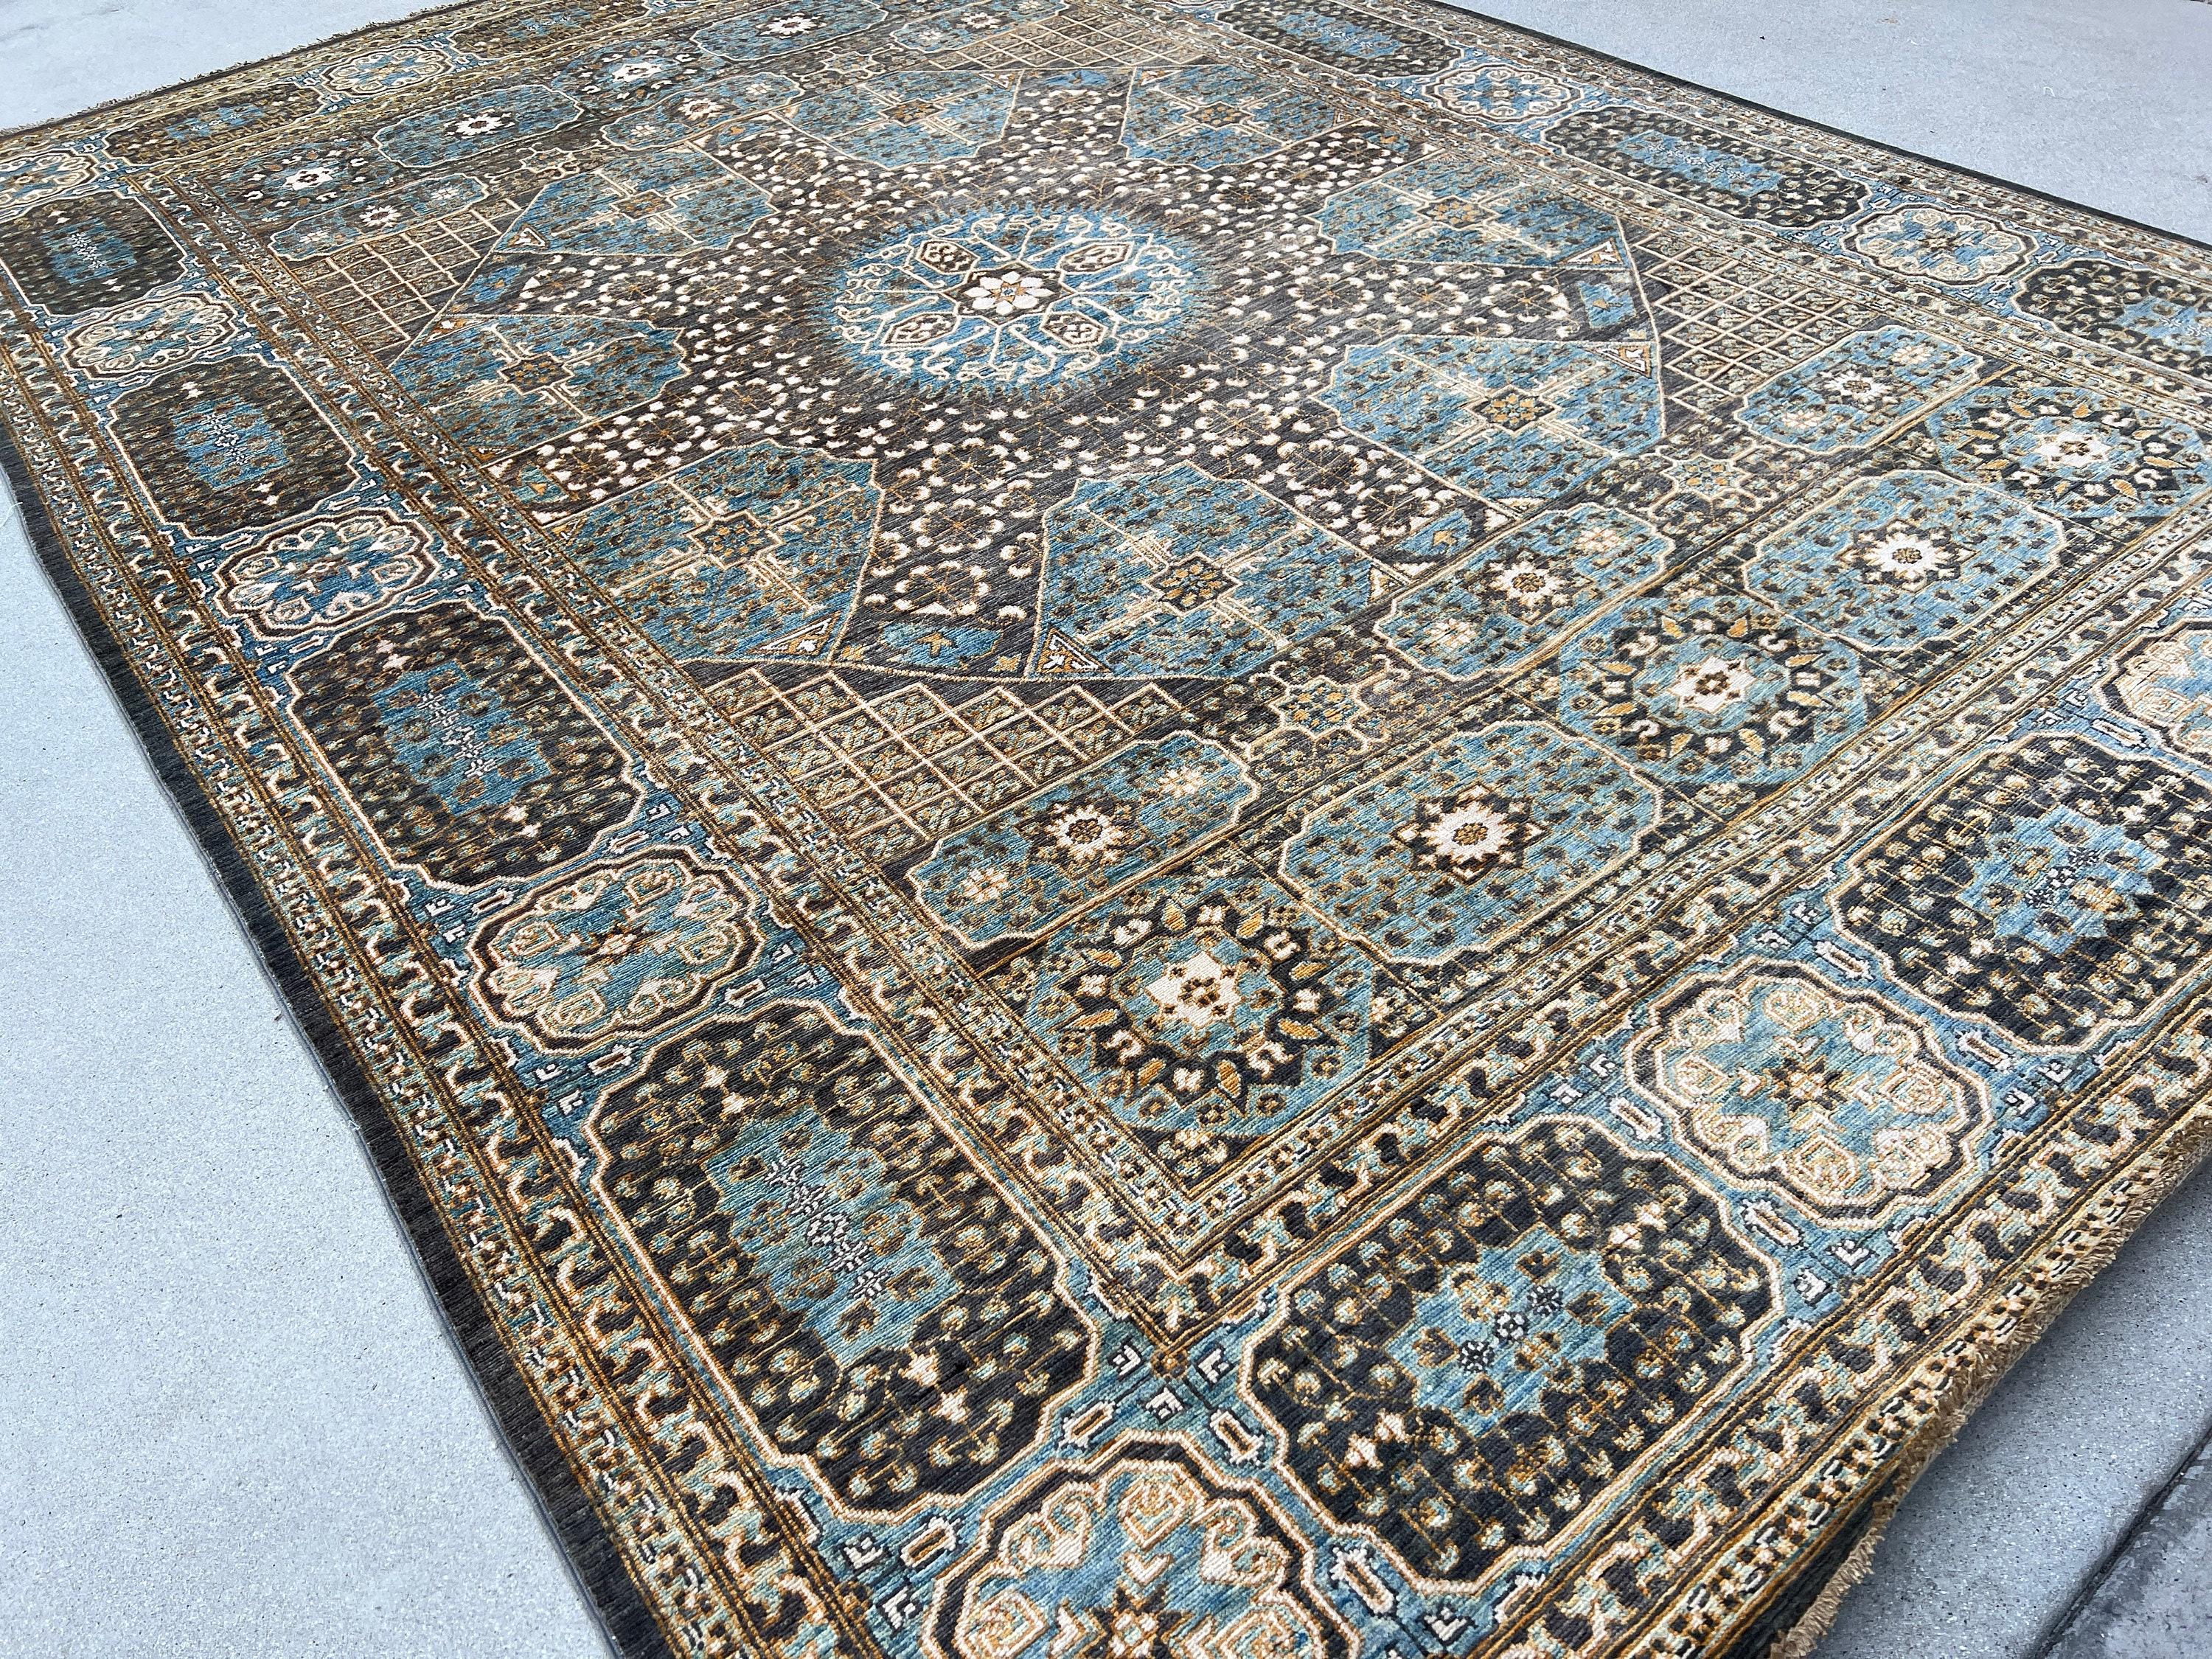 Hand-Knotted Afghan Rug Premium Hand-Spun Afghan Wool Fair Trade In New Condition For Sale In San Marcos, CA